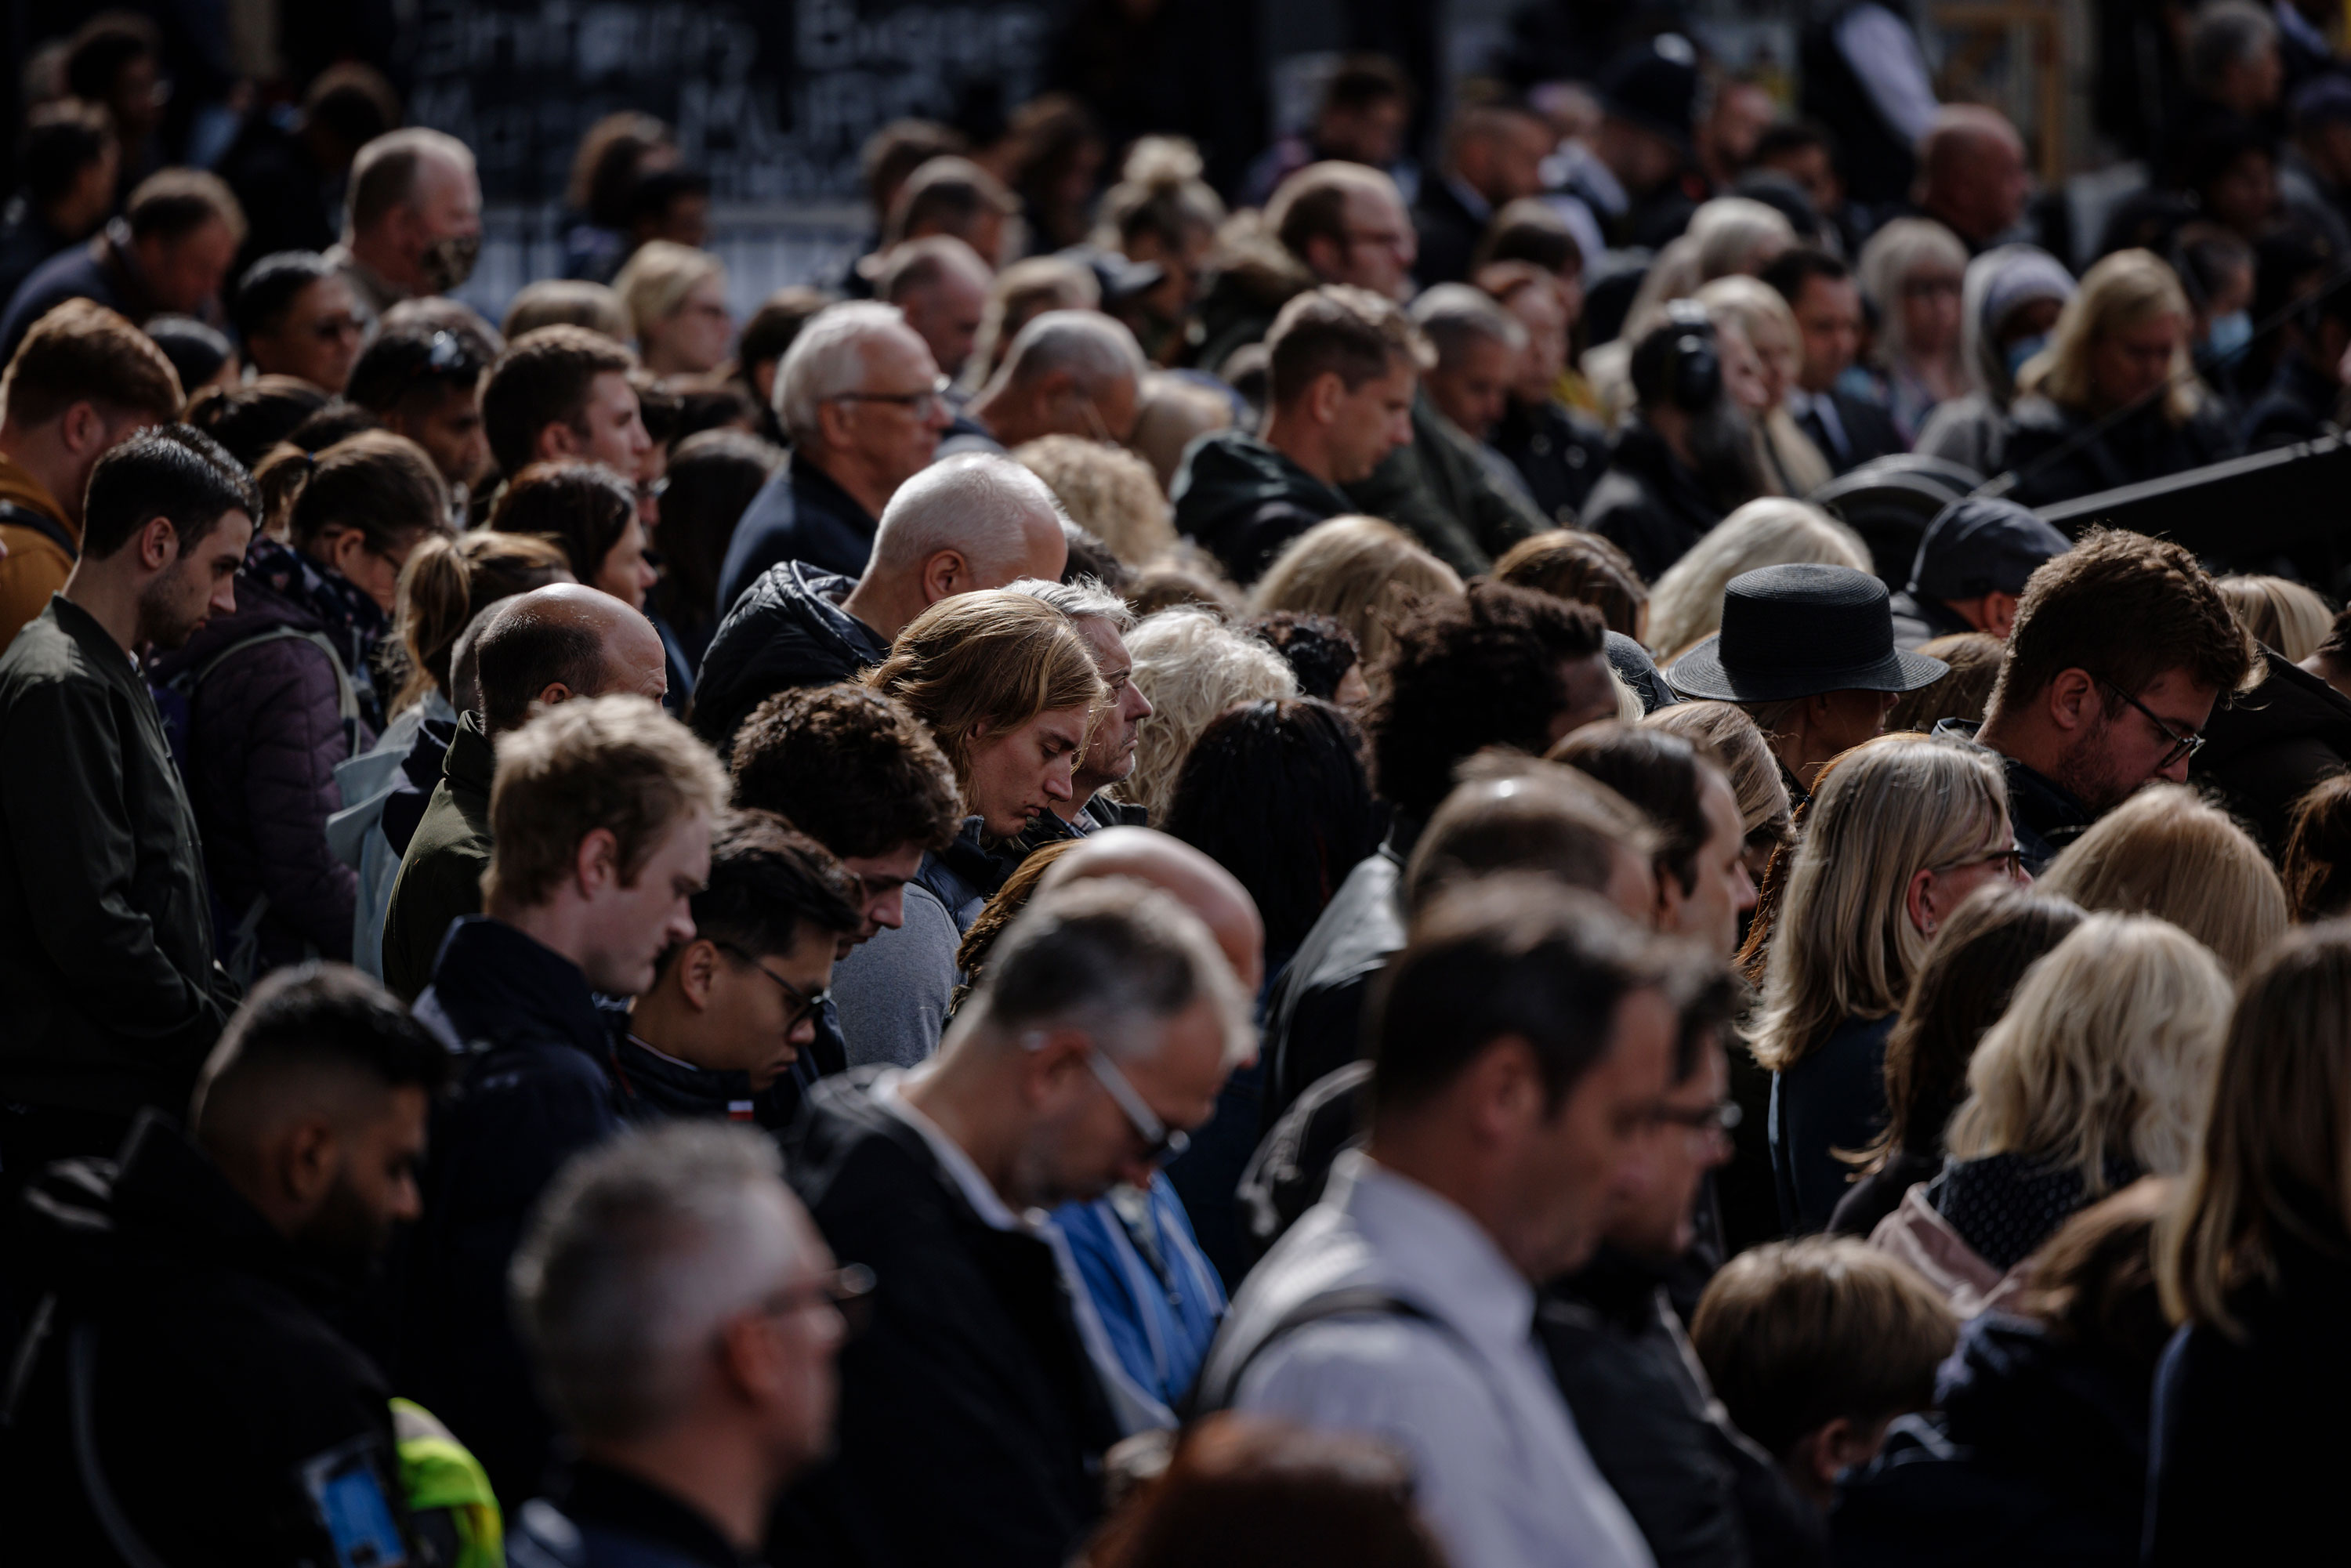 People bow their heads as they observe a two minute moment of silence at the end of Queen Elizabeth's funeral in London on Monday.